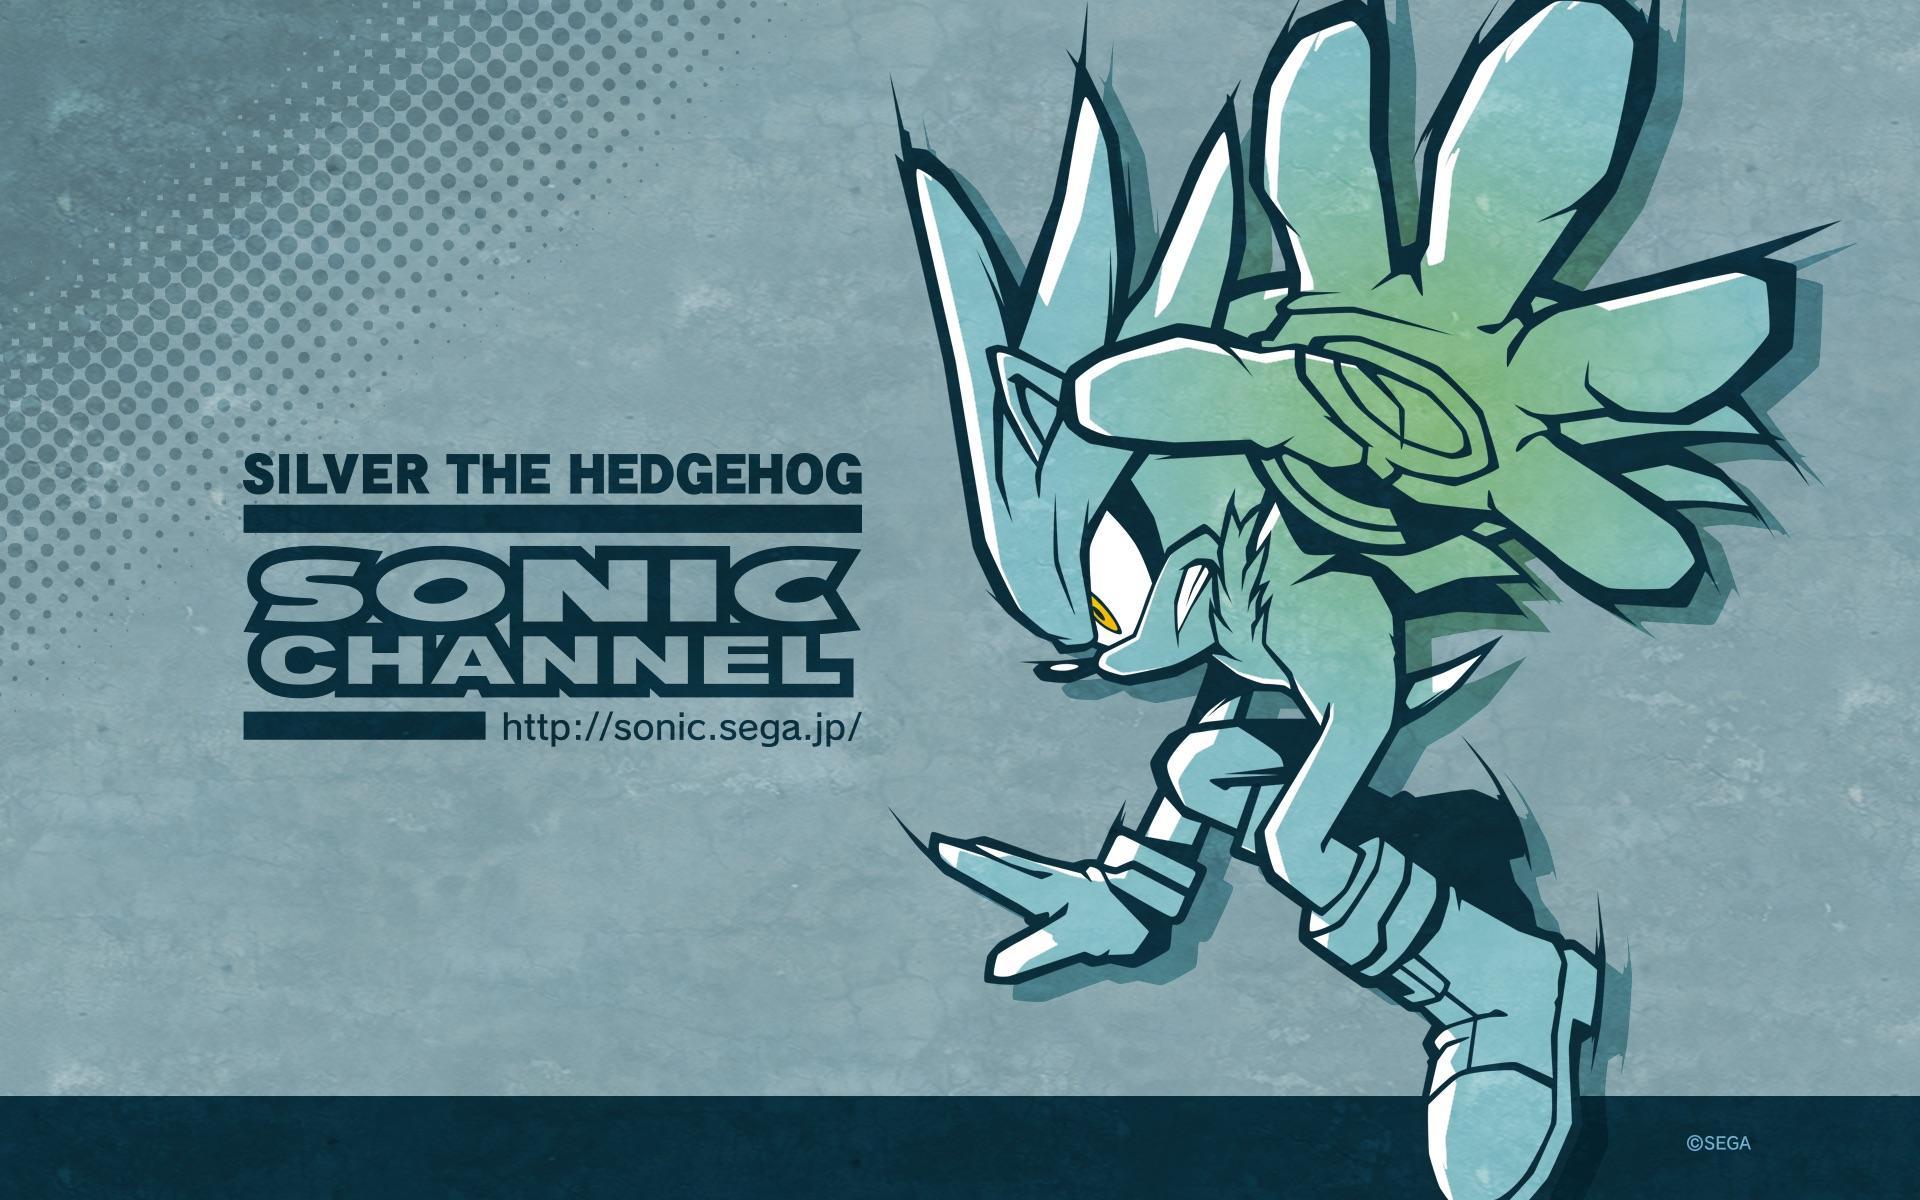 New Silver the hedgehog art from Sonic Channel